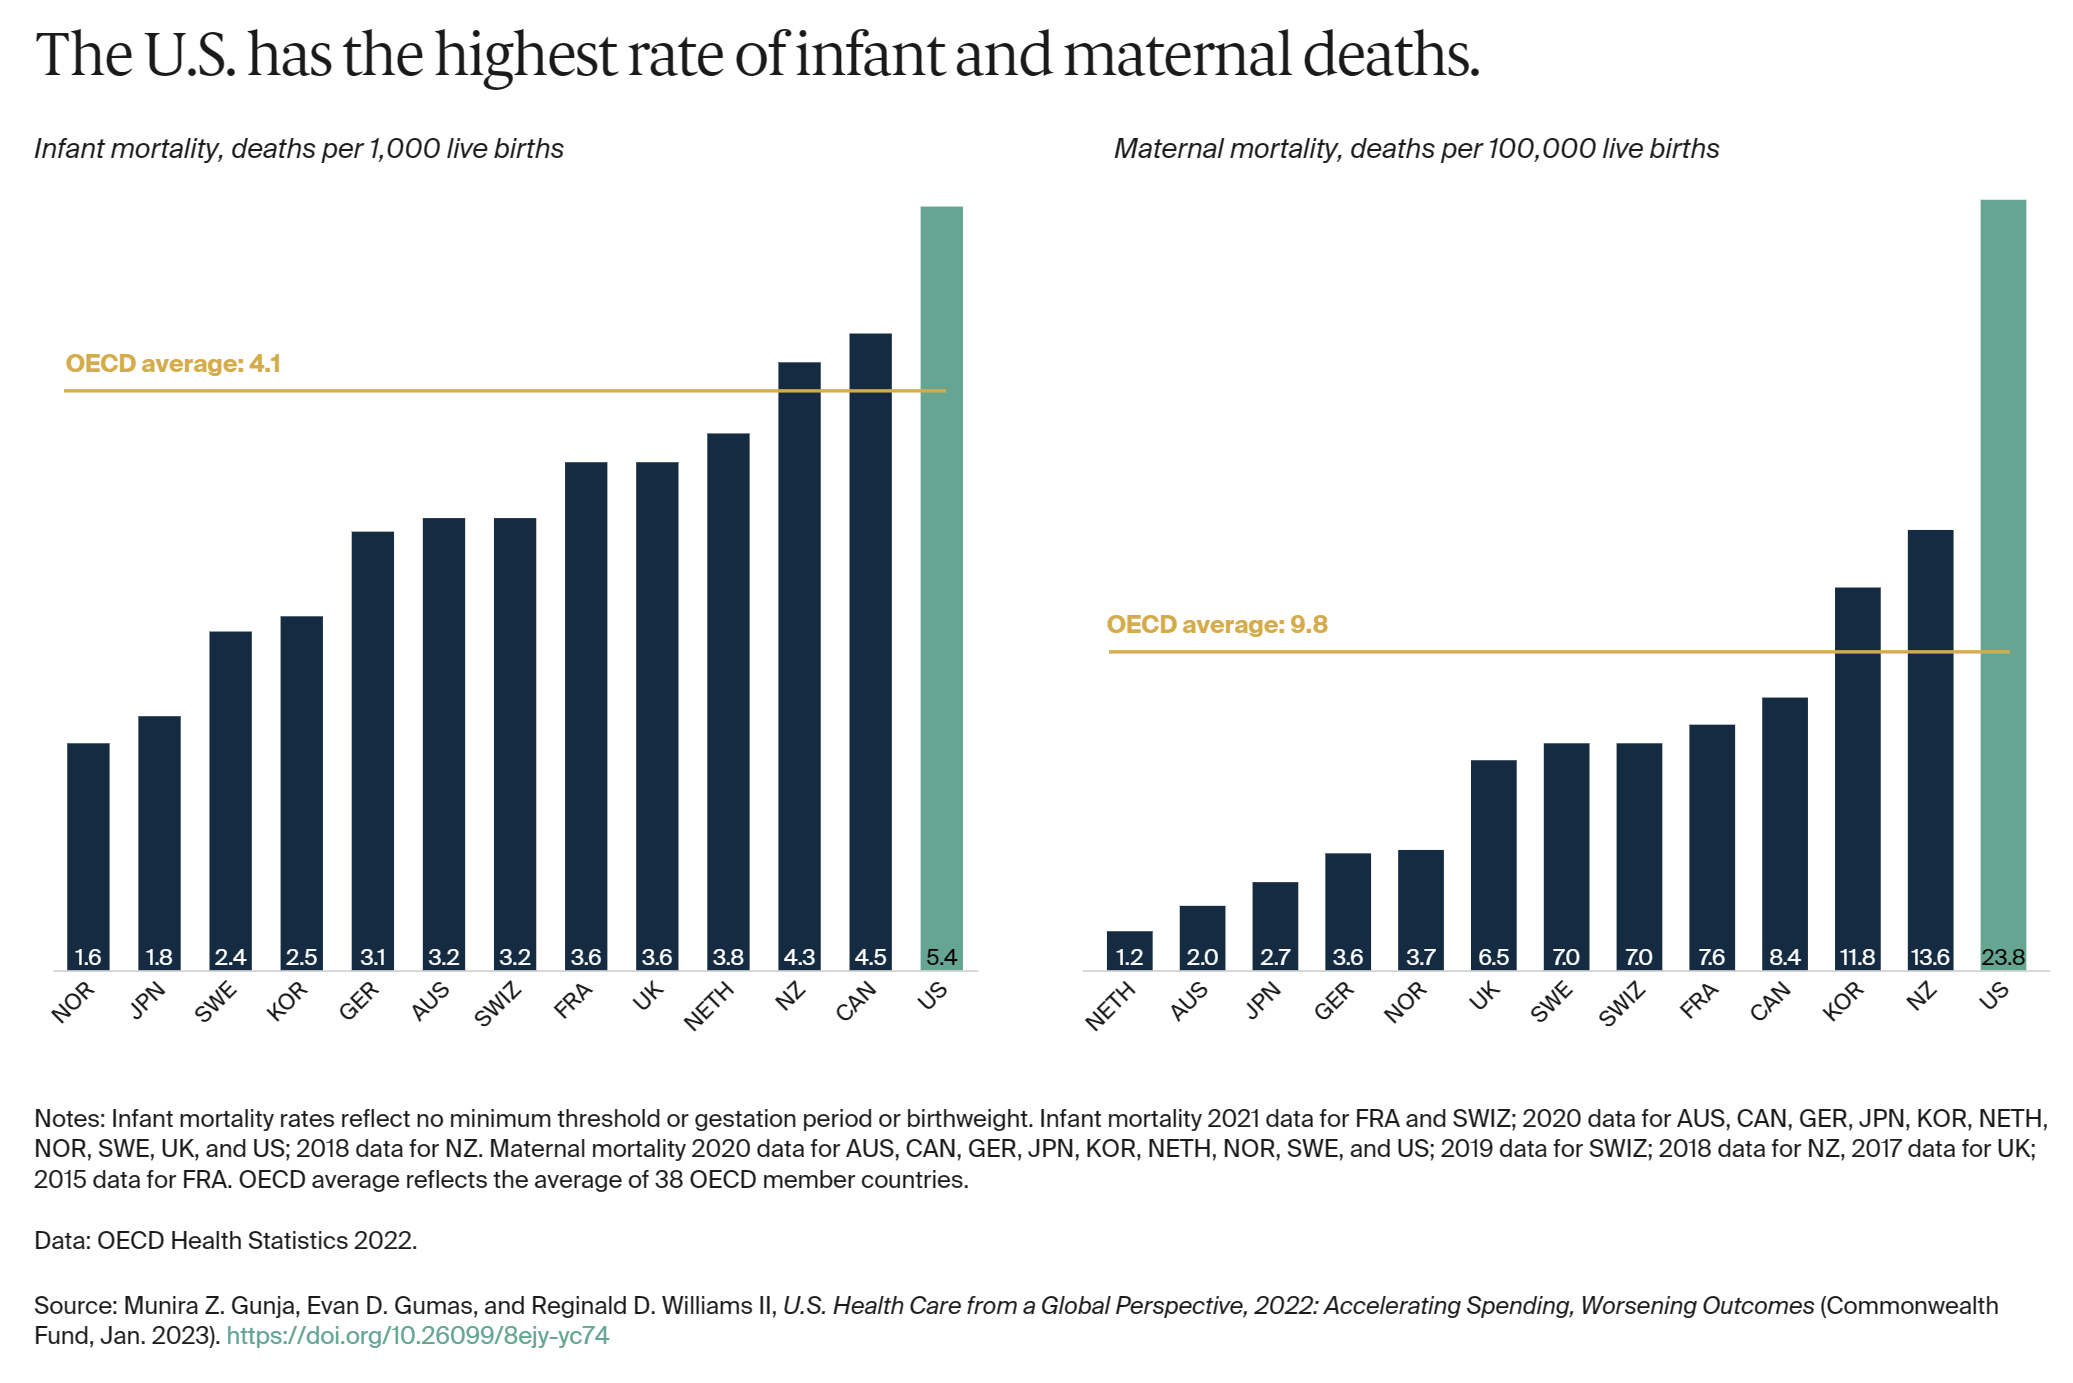 Infant mortality, in deaths per 1,000 live births (left), and maternal mortality, in deaths per 100,000 live births (right) in OECD nations in 2020. The U.S. has the highest rate of infant and maternal deaths. Graphic: The Commonwealth Fund